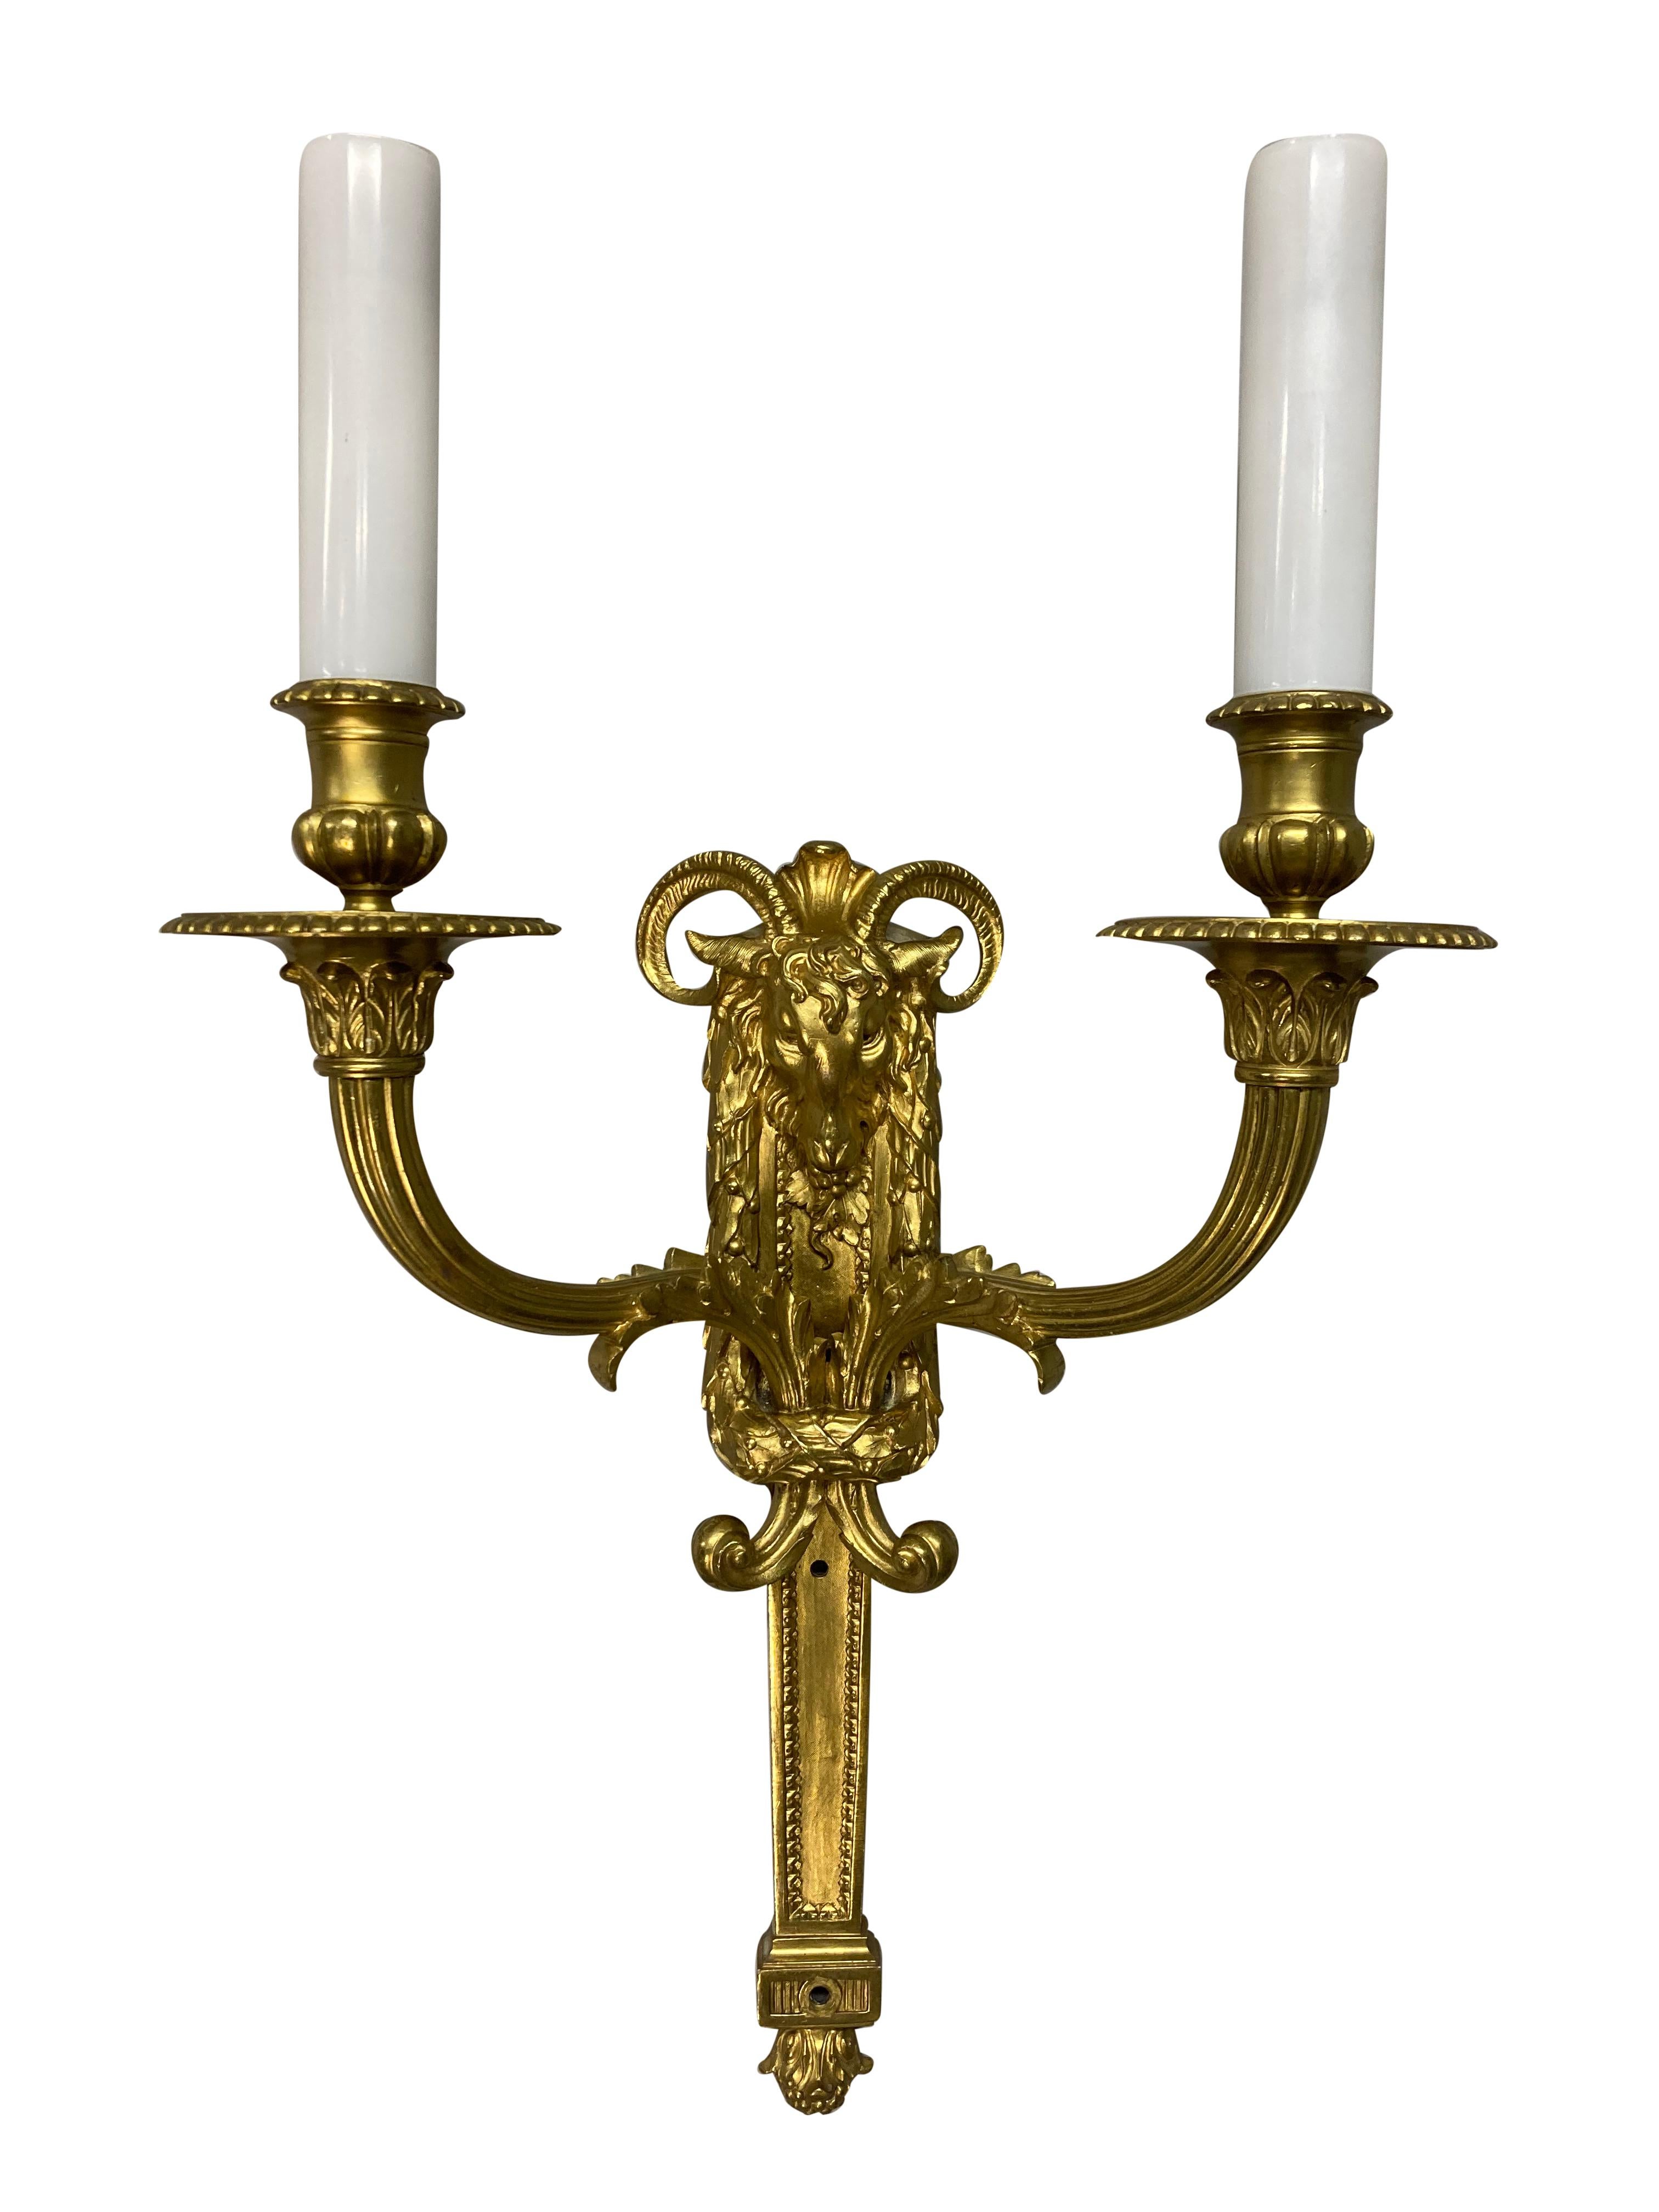 A pair of English gilt bronze Regency style twin branch wall lights. Of good quality, with rams heads and acanthus decoration. With white glass sleeves.